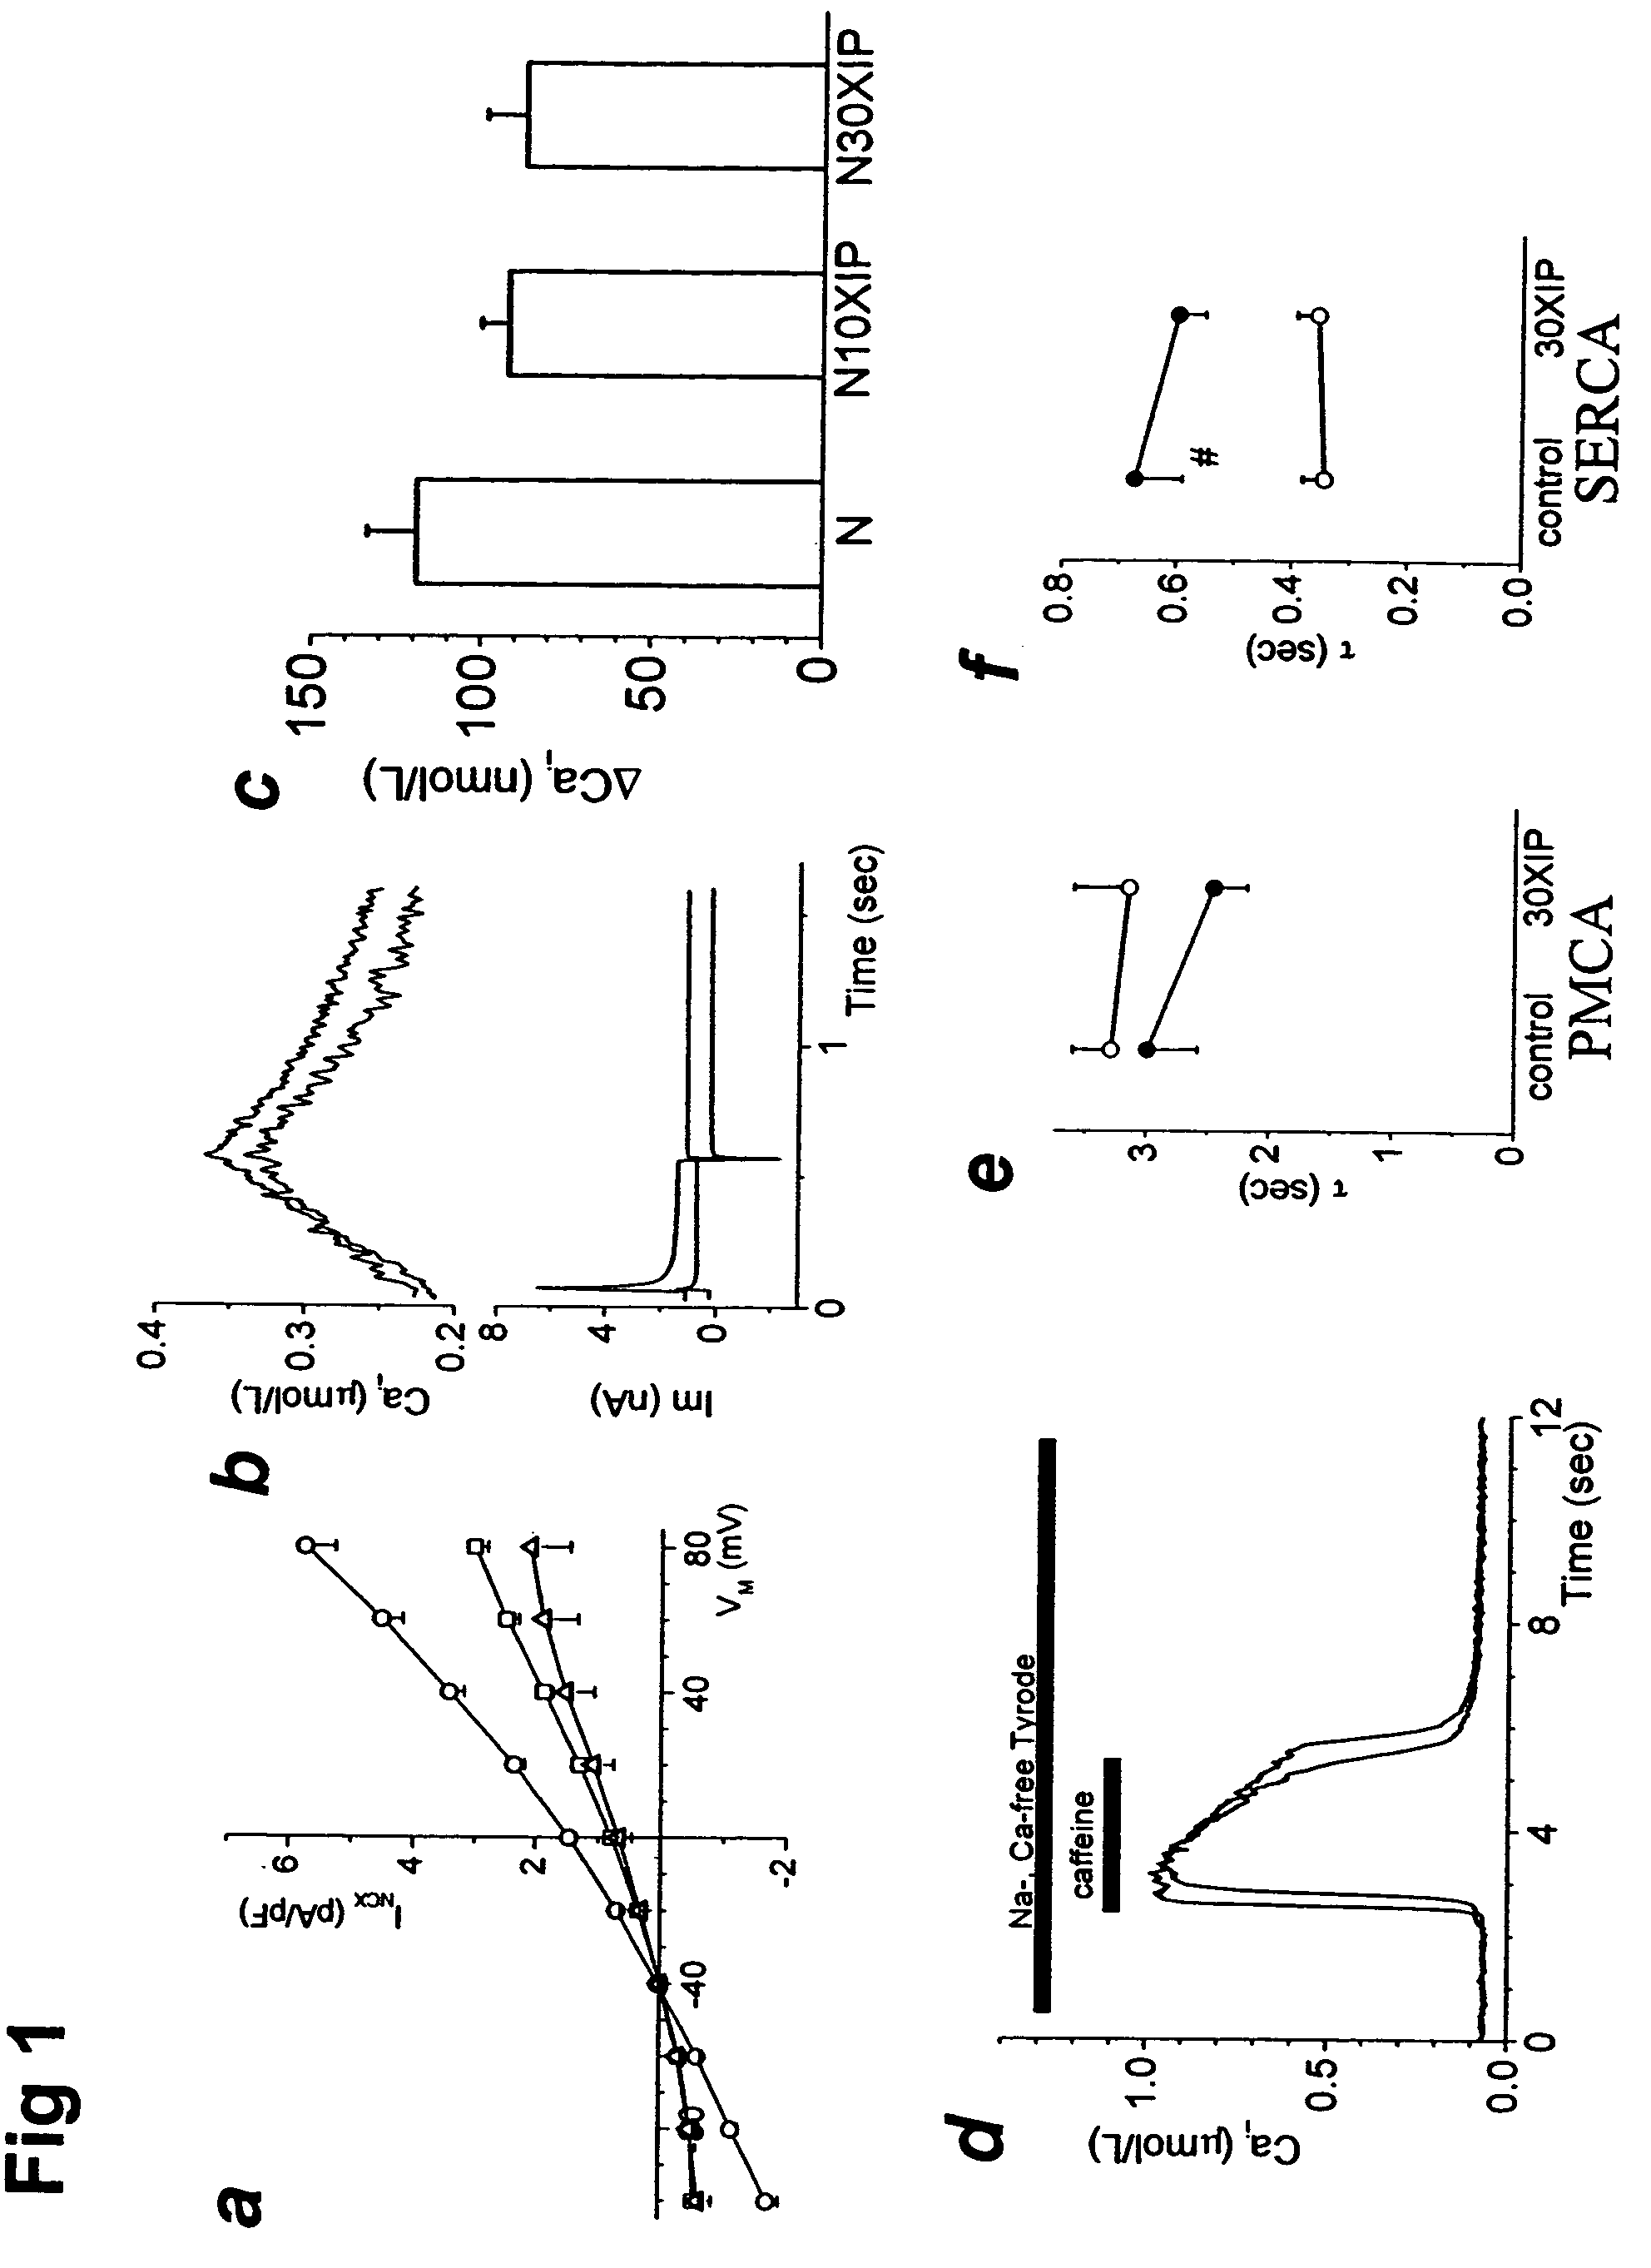 Method for treating heart failure by inhibiting the sarcolemmal sodium/calcium exchange